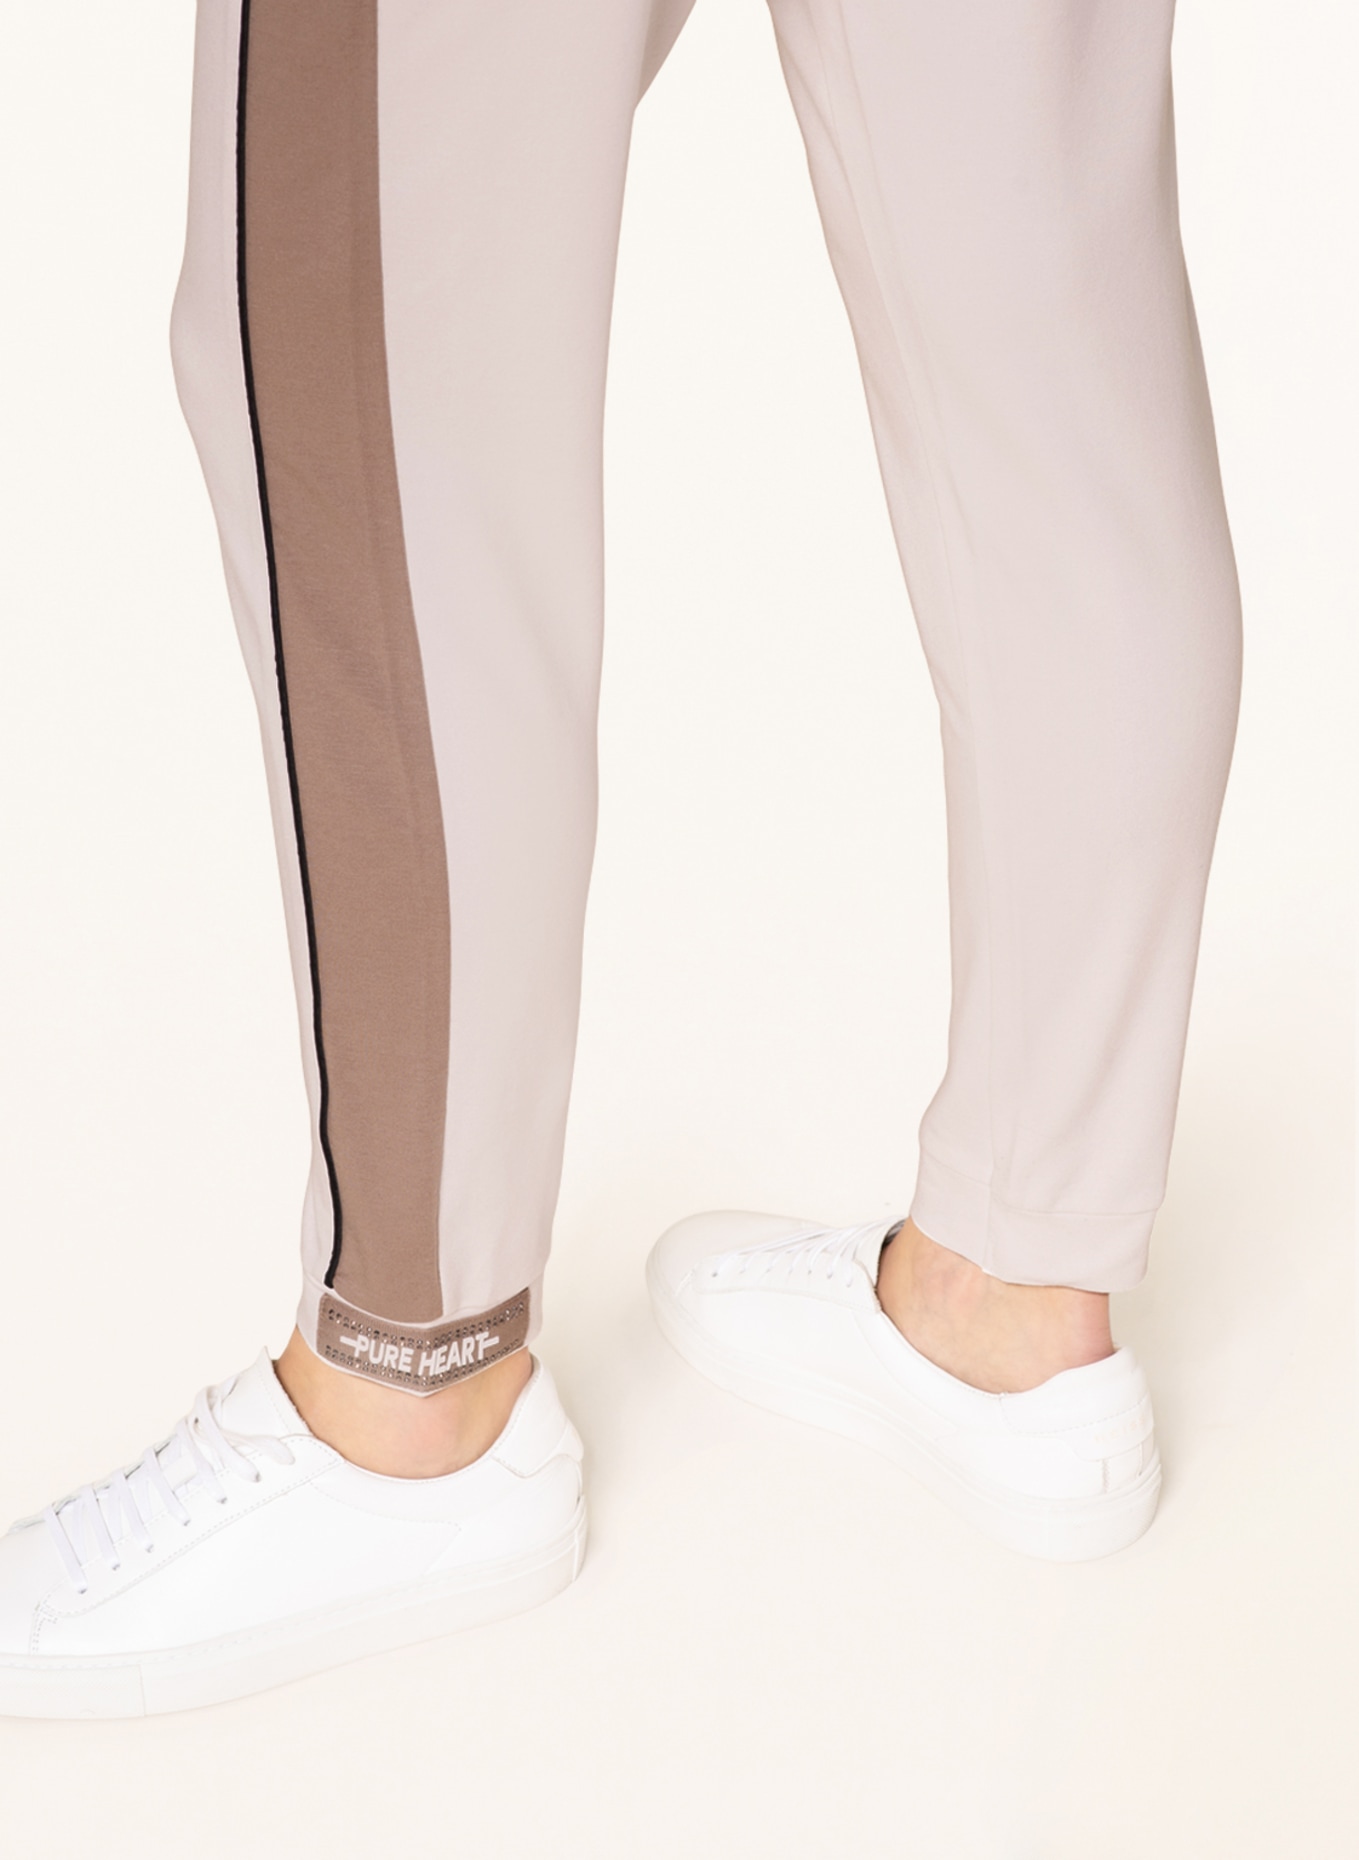 monari Pants in jogger style with tuxedo stripes, Color: CREAM/ BEIGE (Image 5)